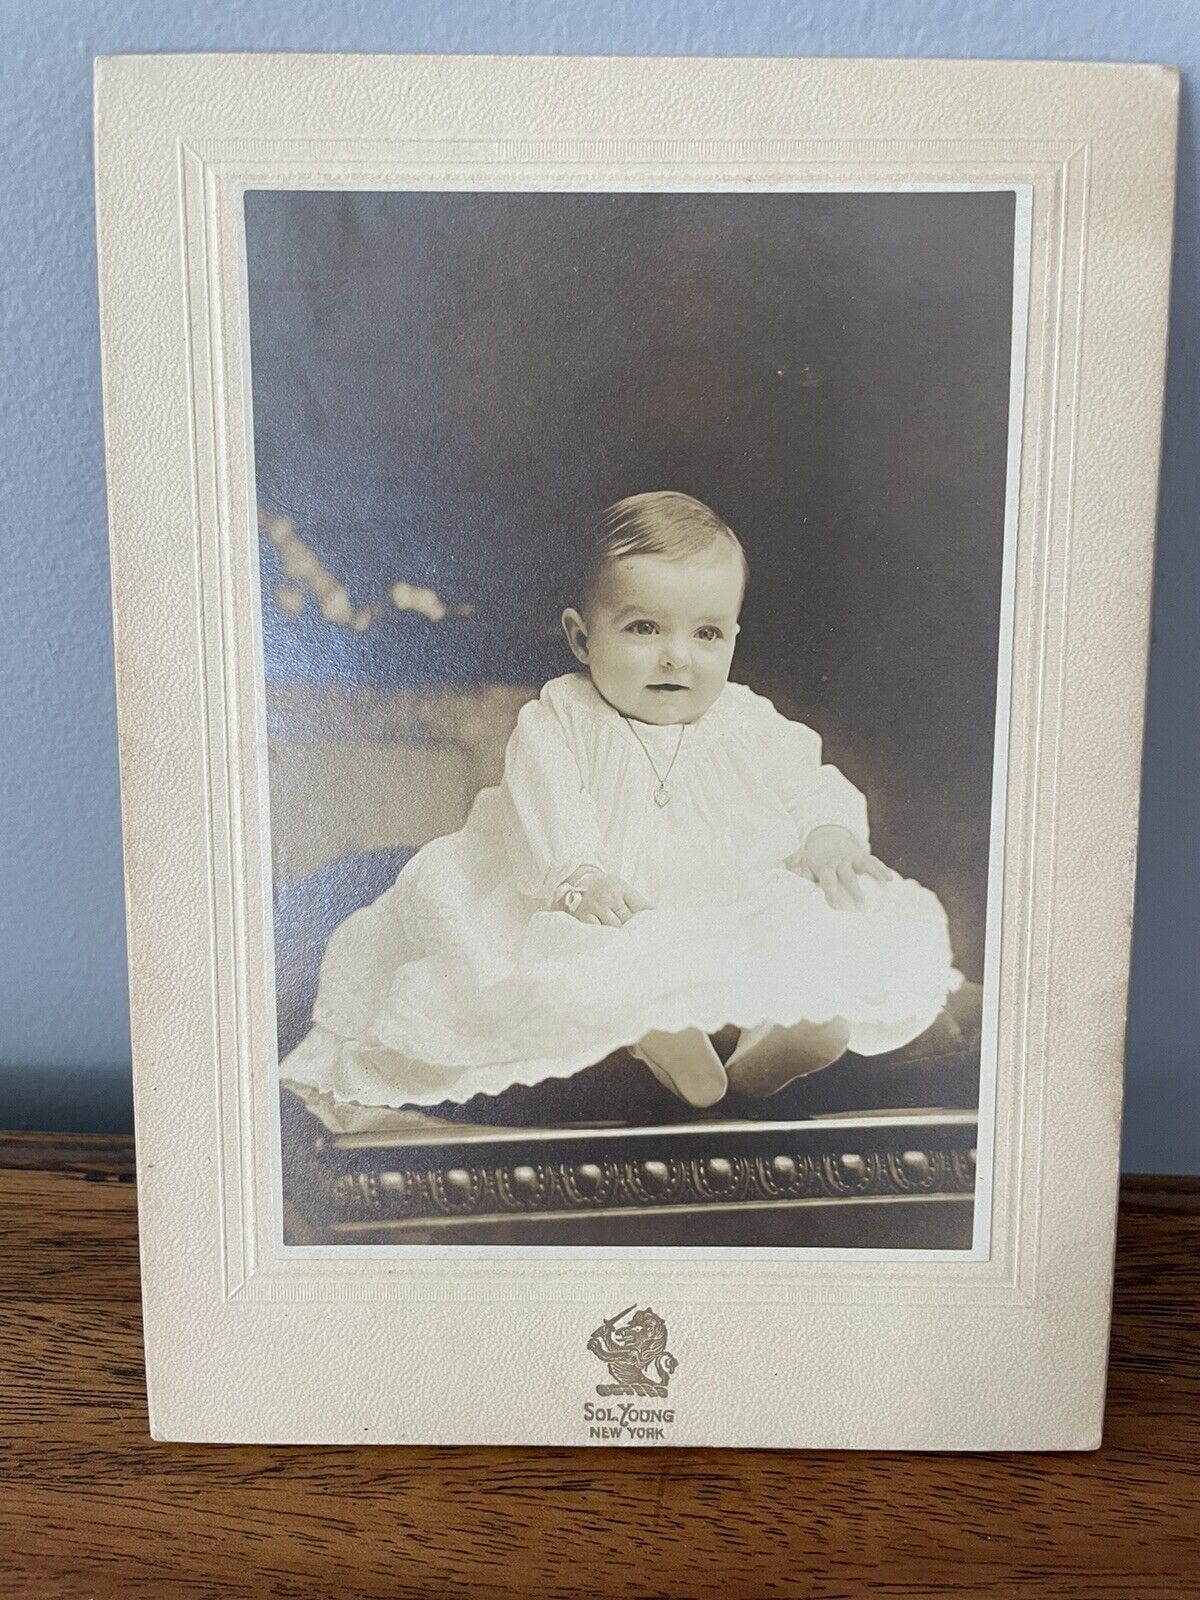 ANTIQUE CABINET CARD PHOTOGRAPH OF ADORABLE SEATED BABY IN WHITE GOWN